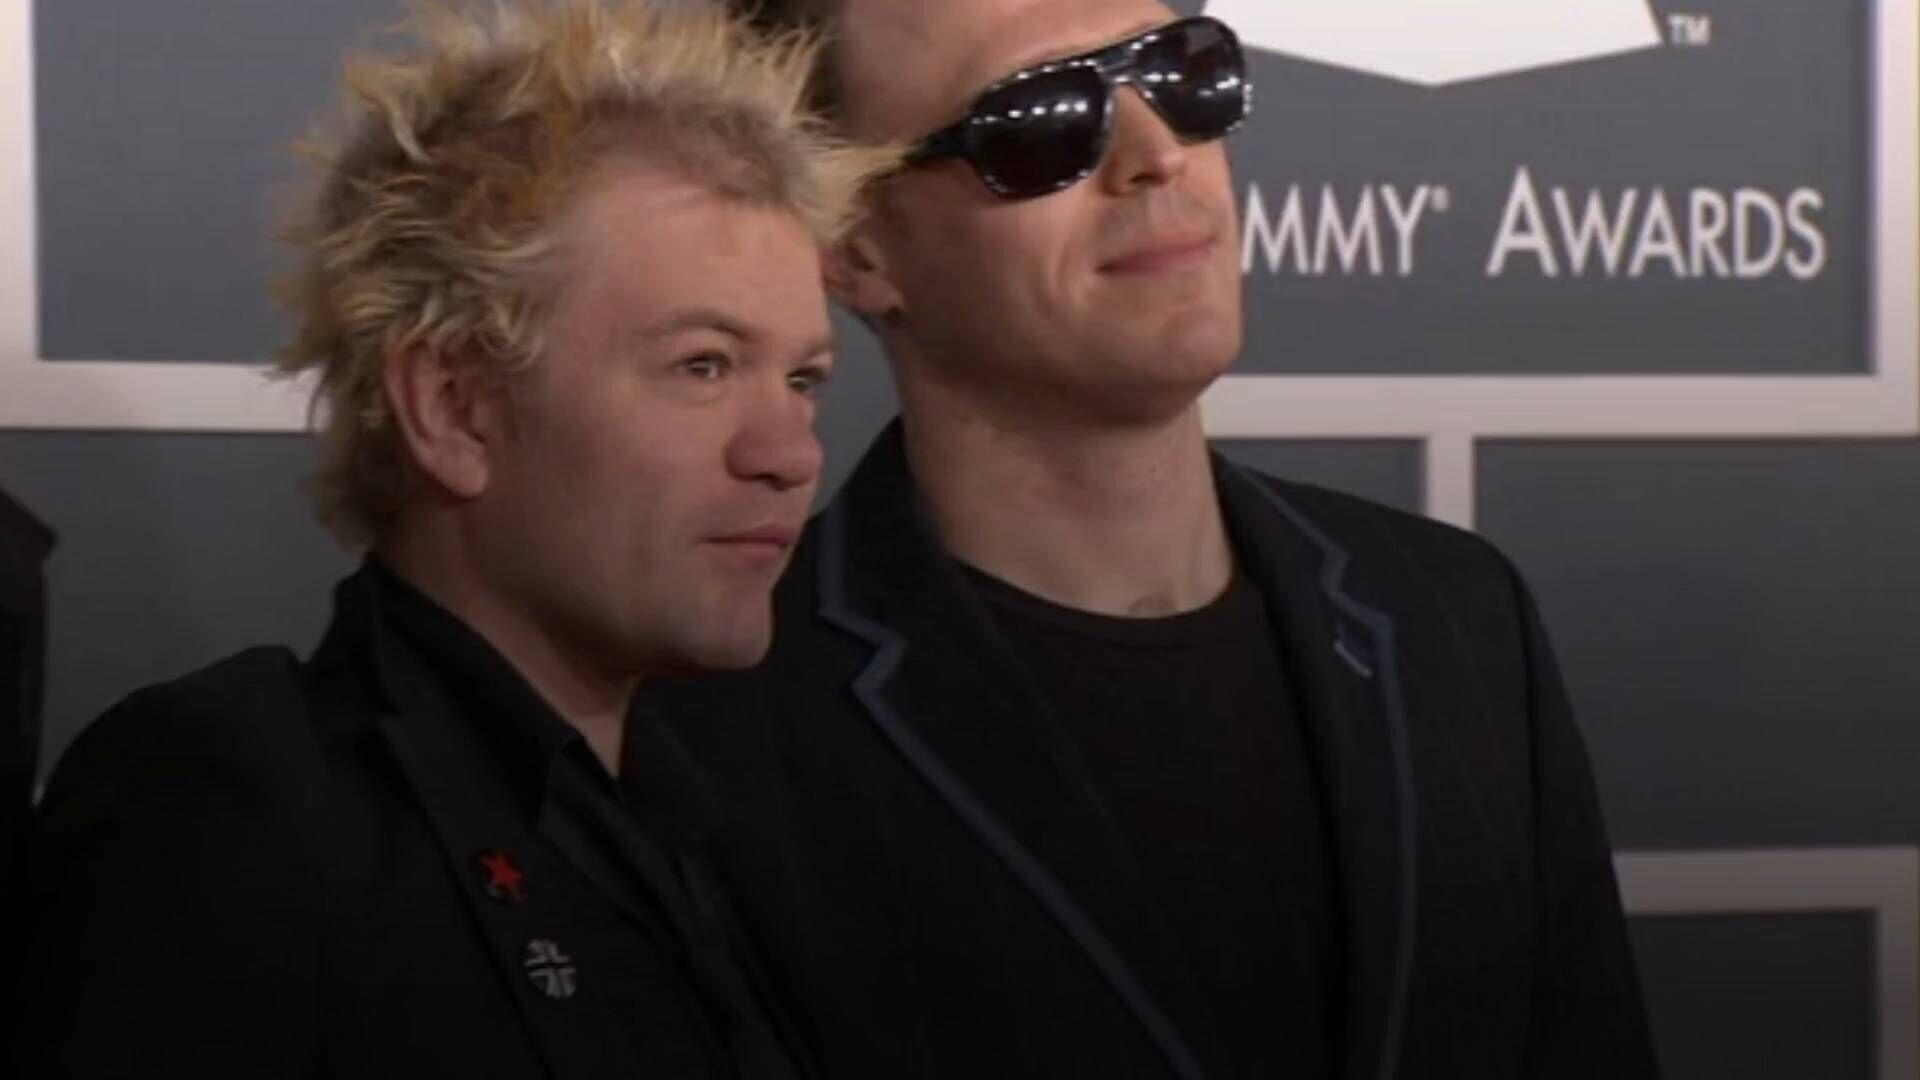 Sum 41 are breaking up after one final album and world tour